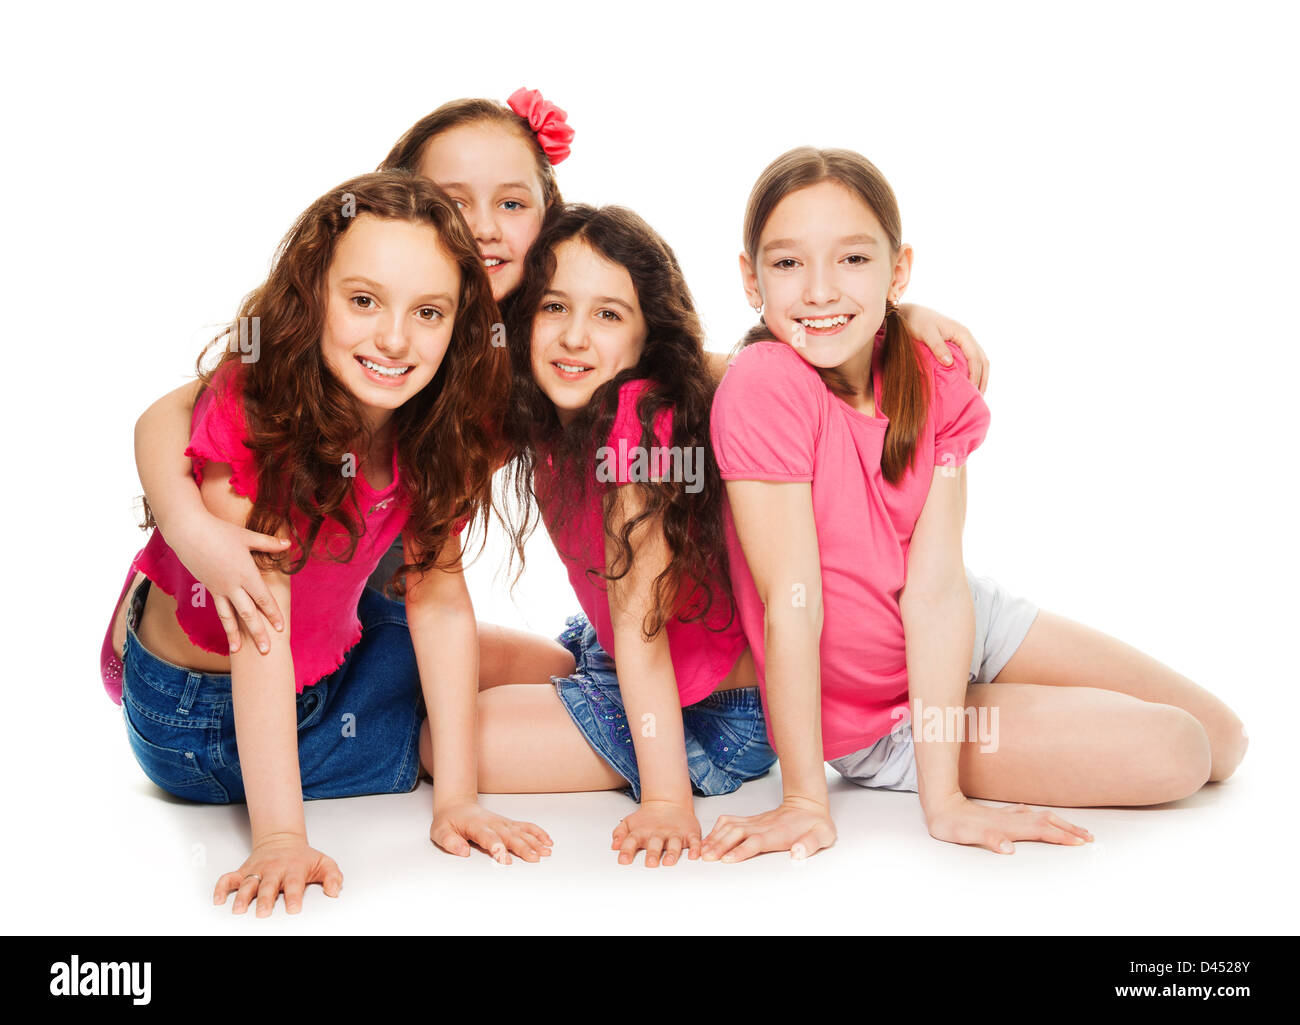 Four cute 10 years old girls in pink sitting, smiling and look happy, isolated on white Stock Photo